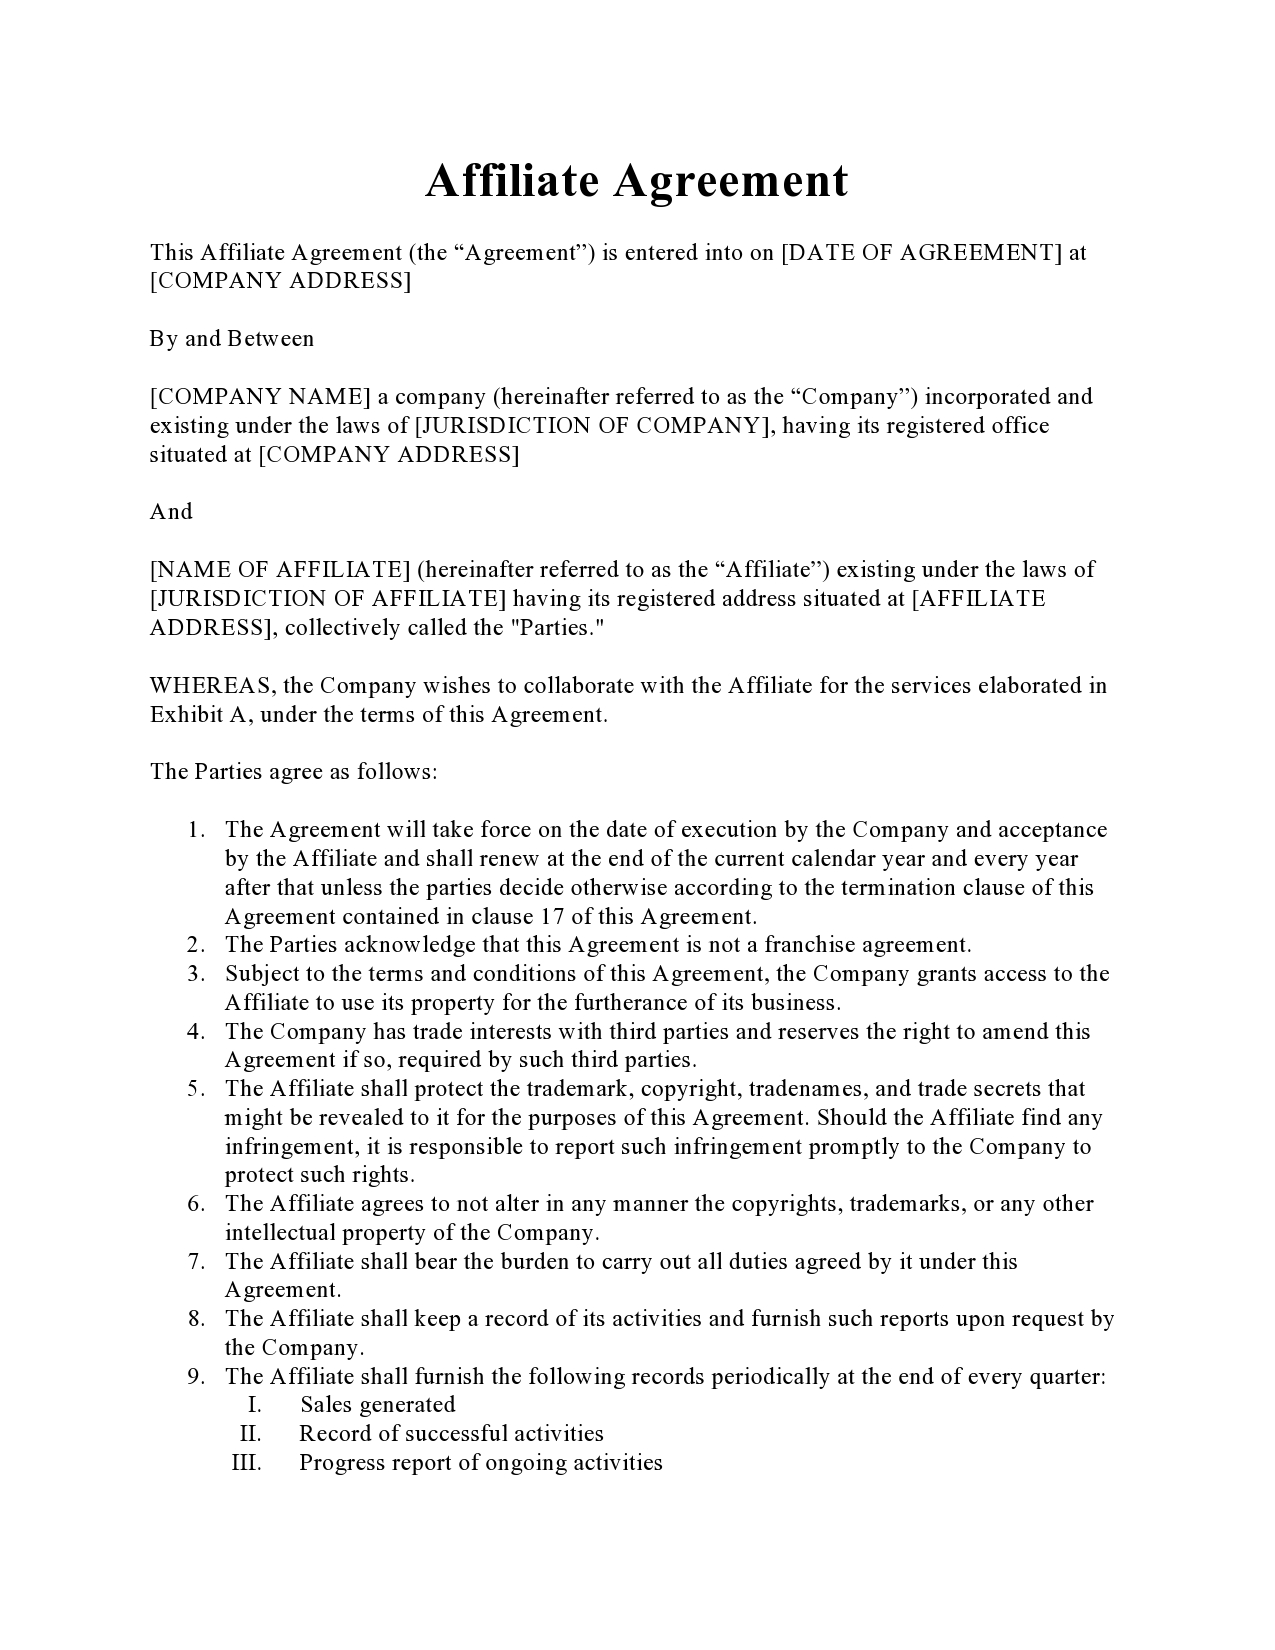 Free affiliate agreement 02